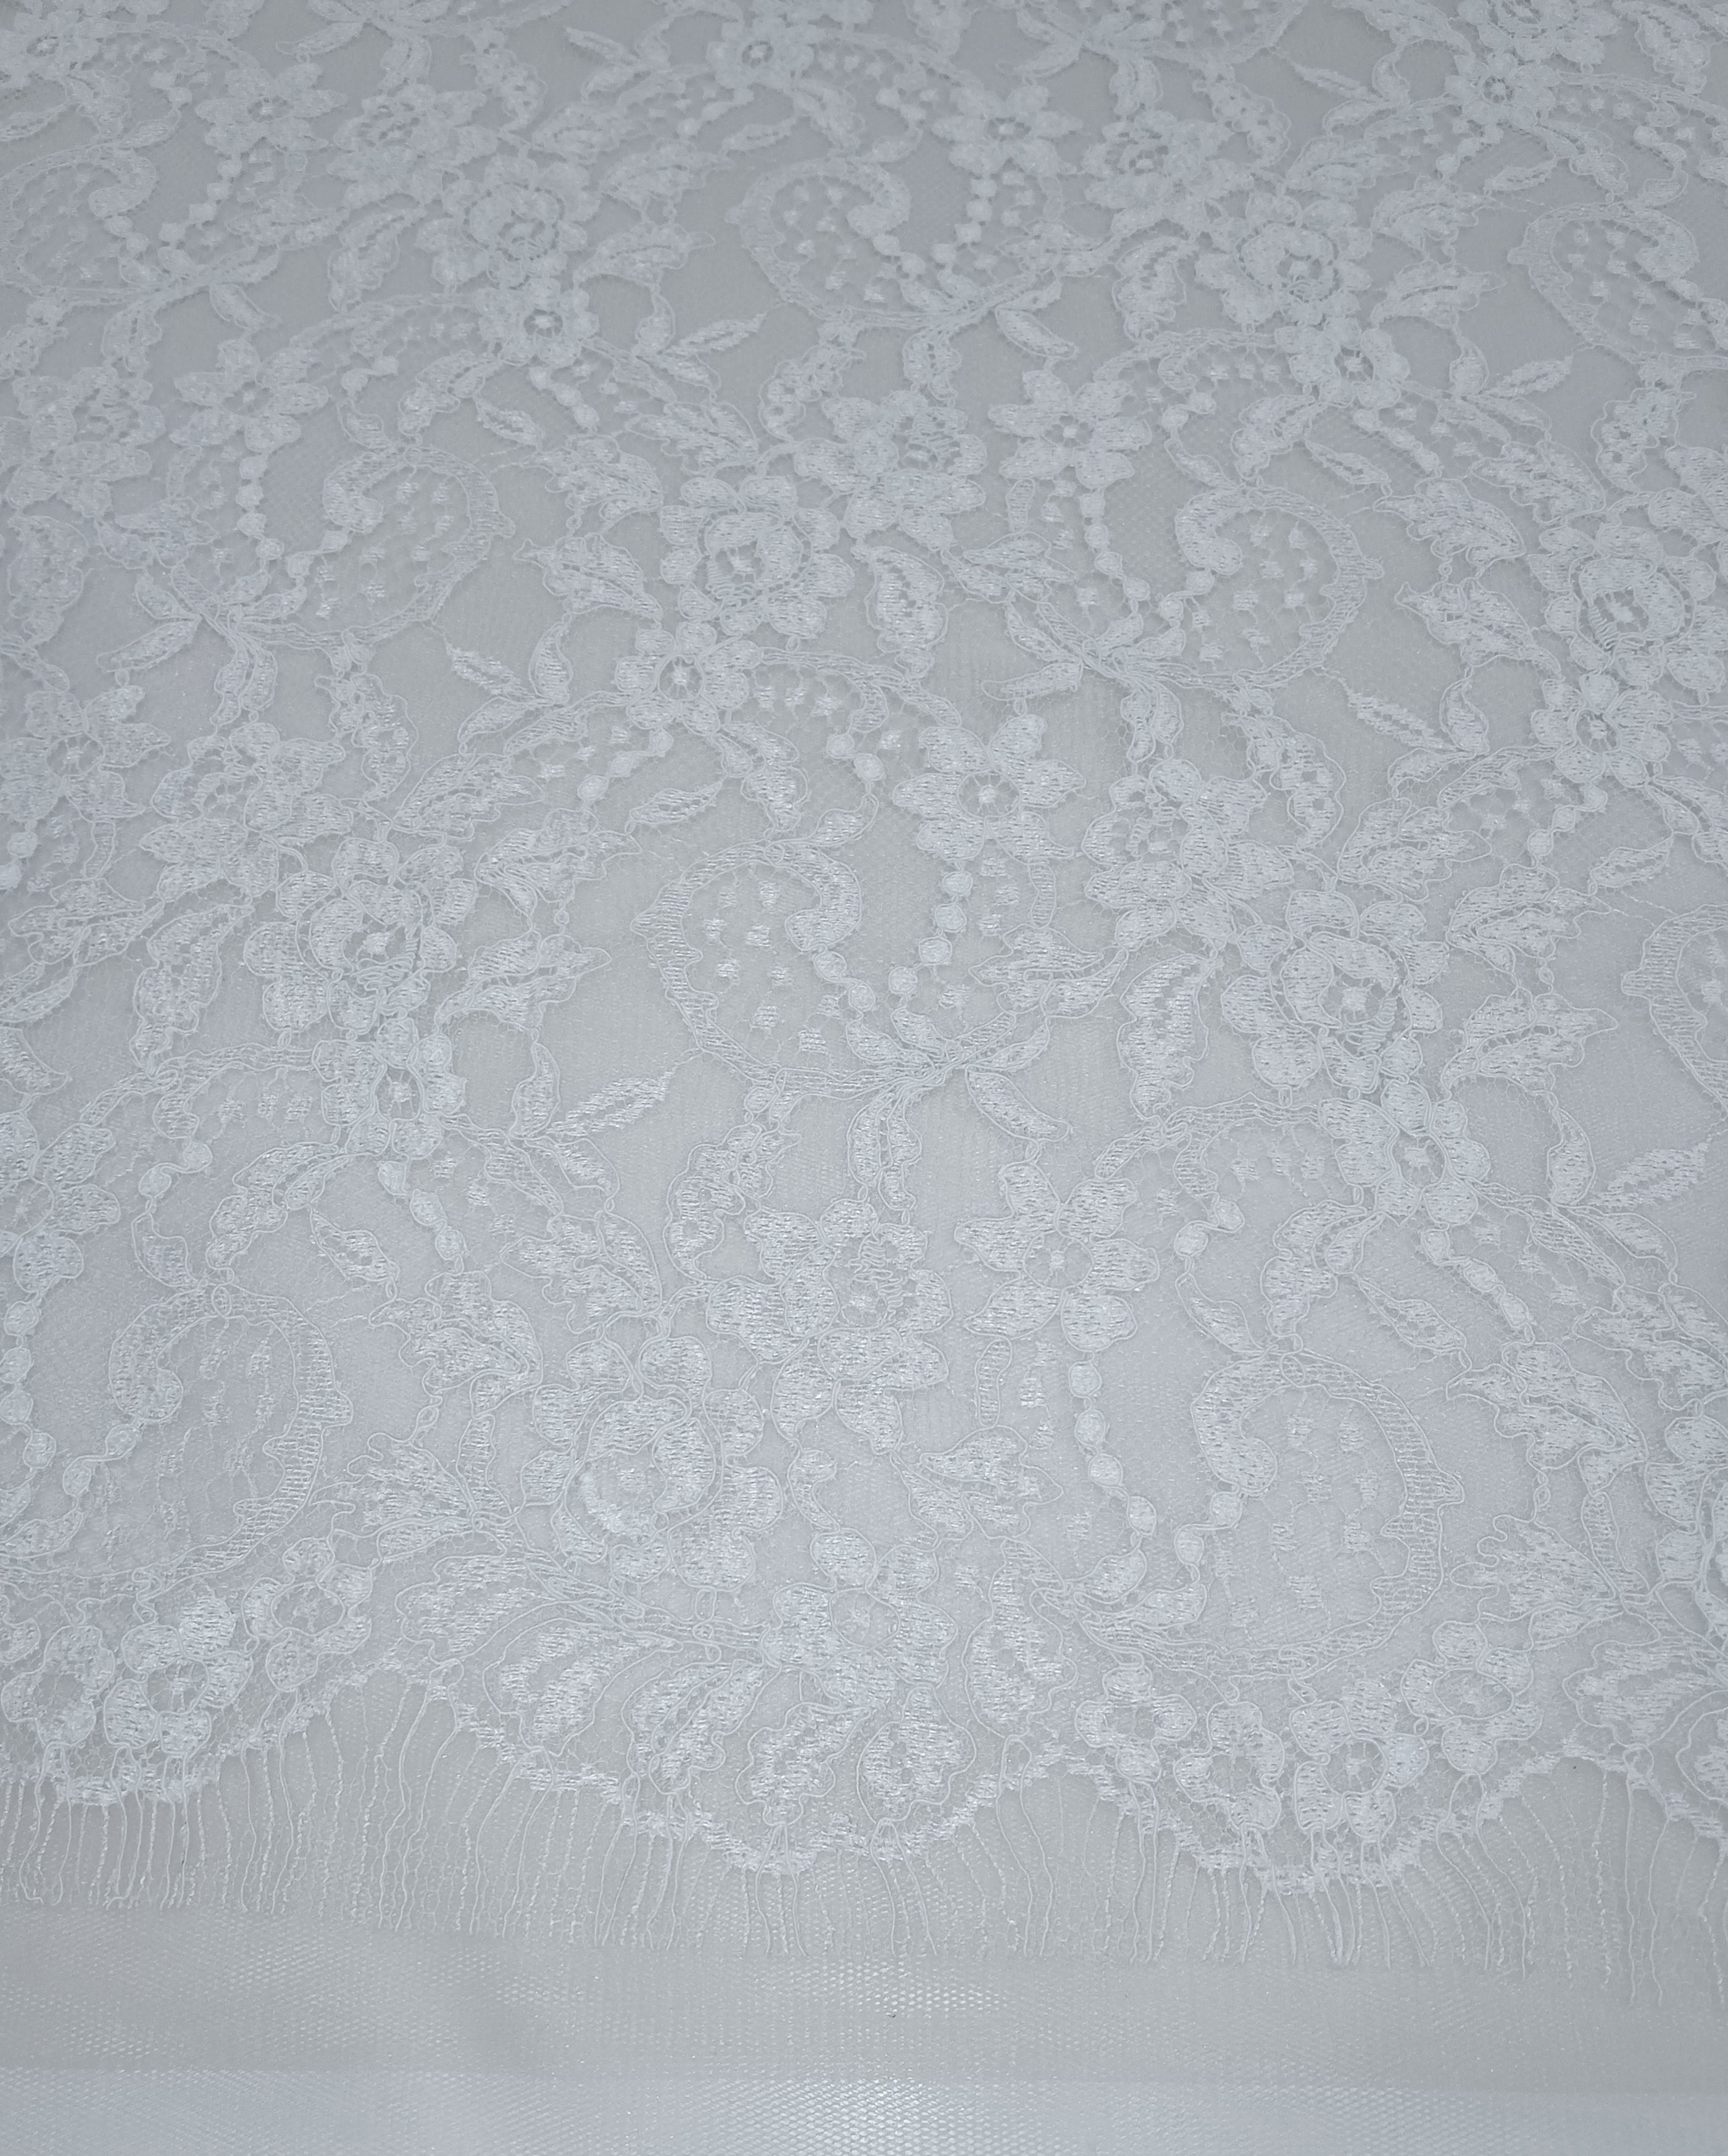 FRENCH CHANTILLY LACE - OFF WHITE